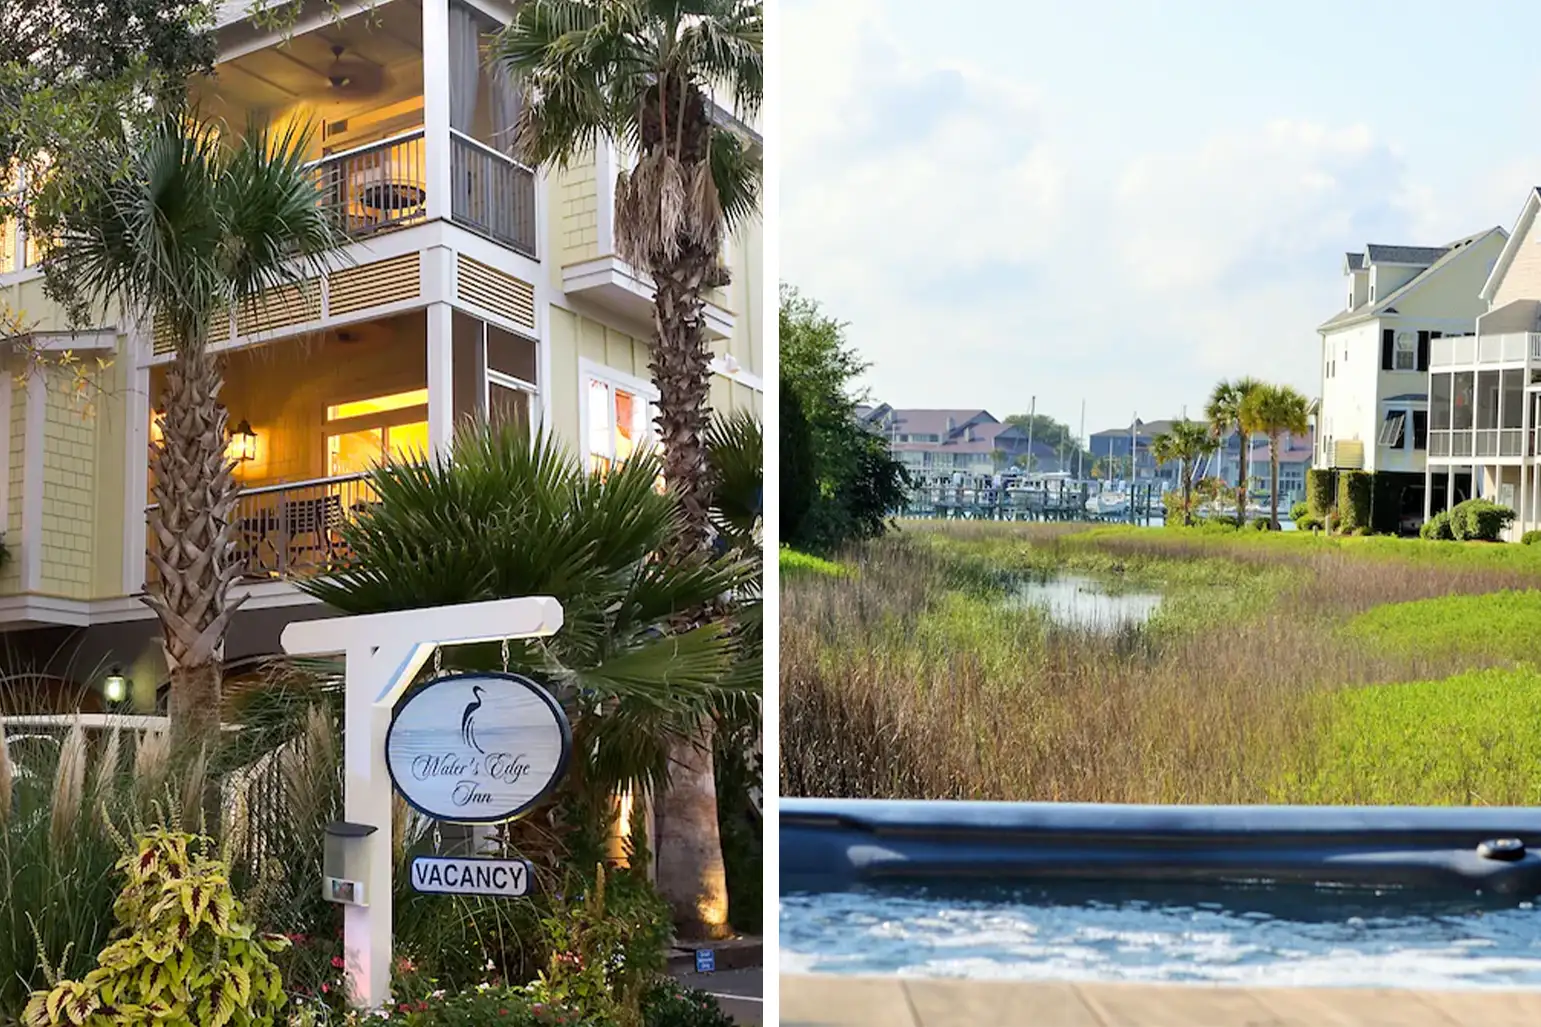 Left: Water's Edge Inn's sign and exterior with palm trees; Right: View of marina from the hot tub